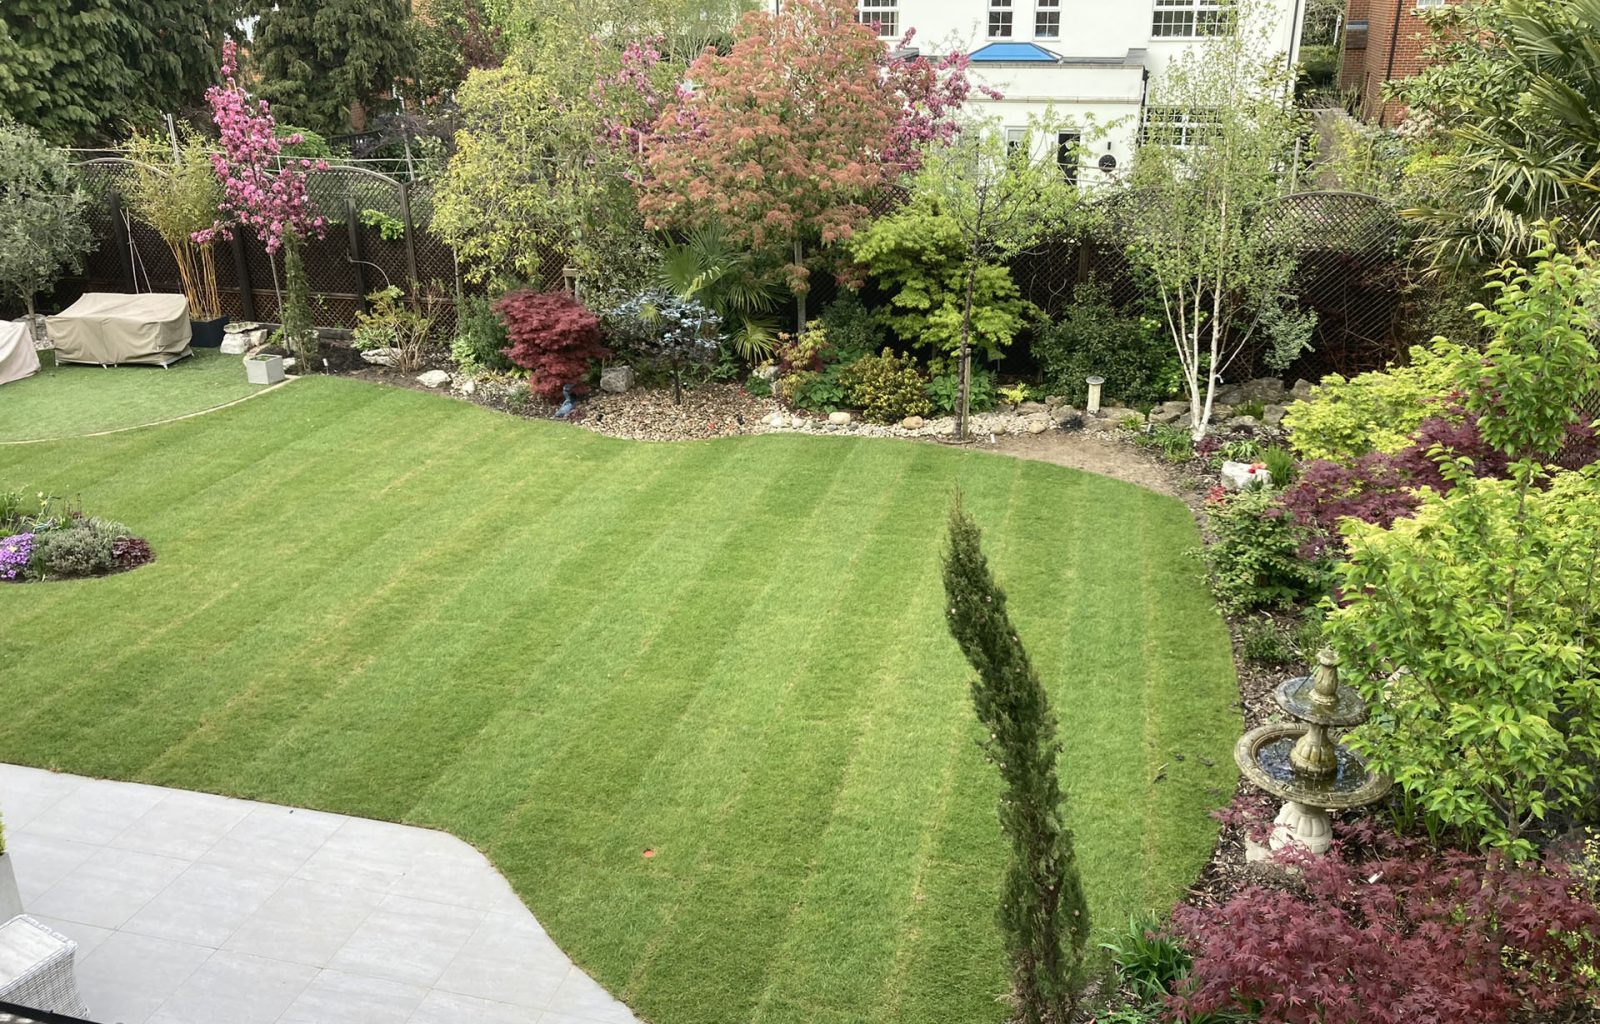 Newly laid turf with surrounding mature planted borders and patio area